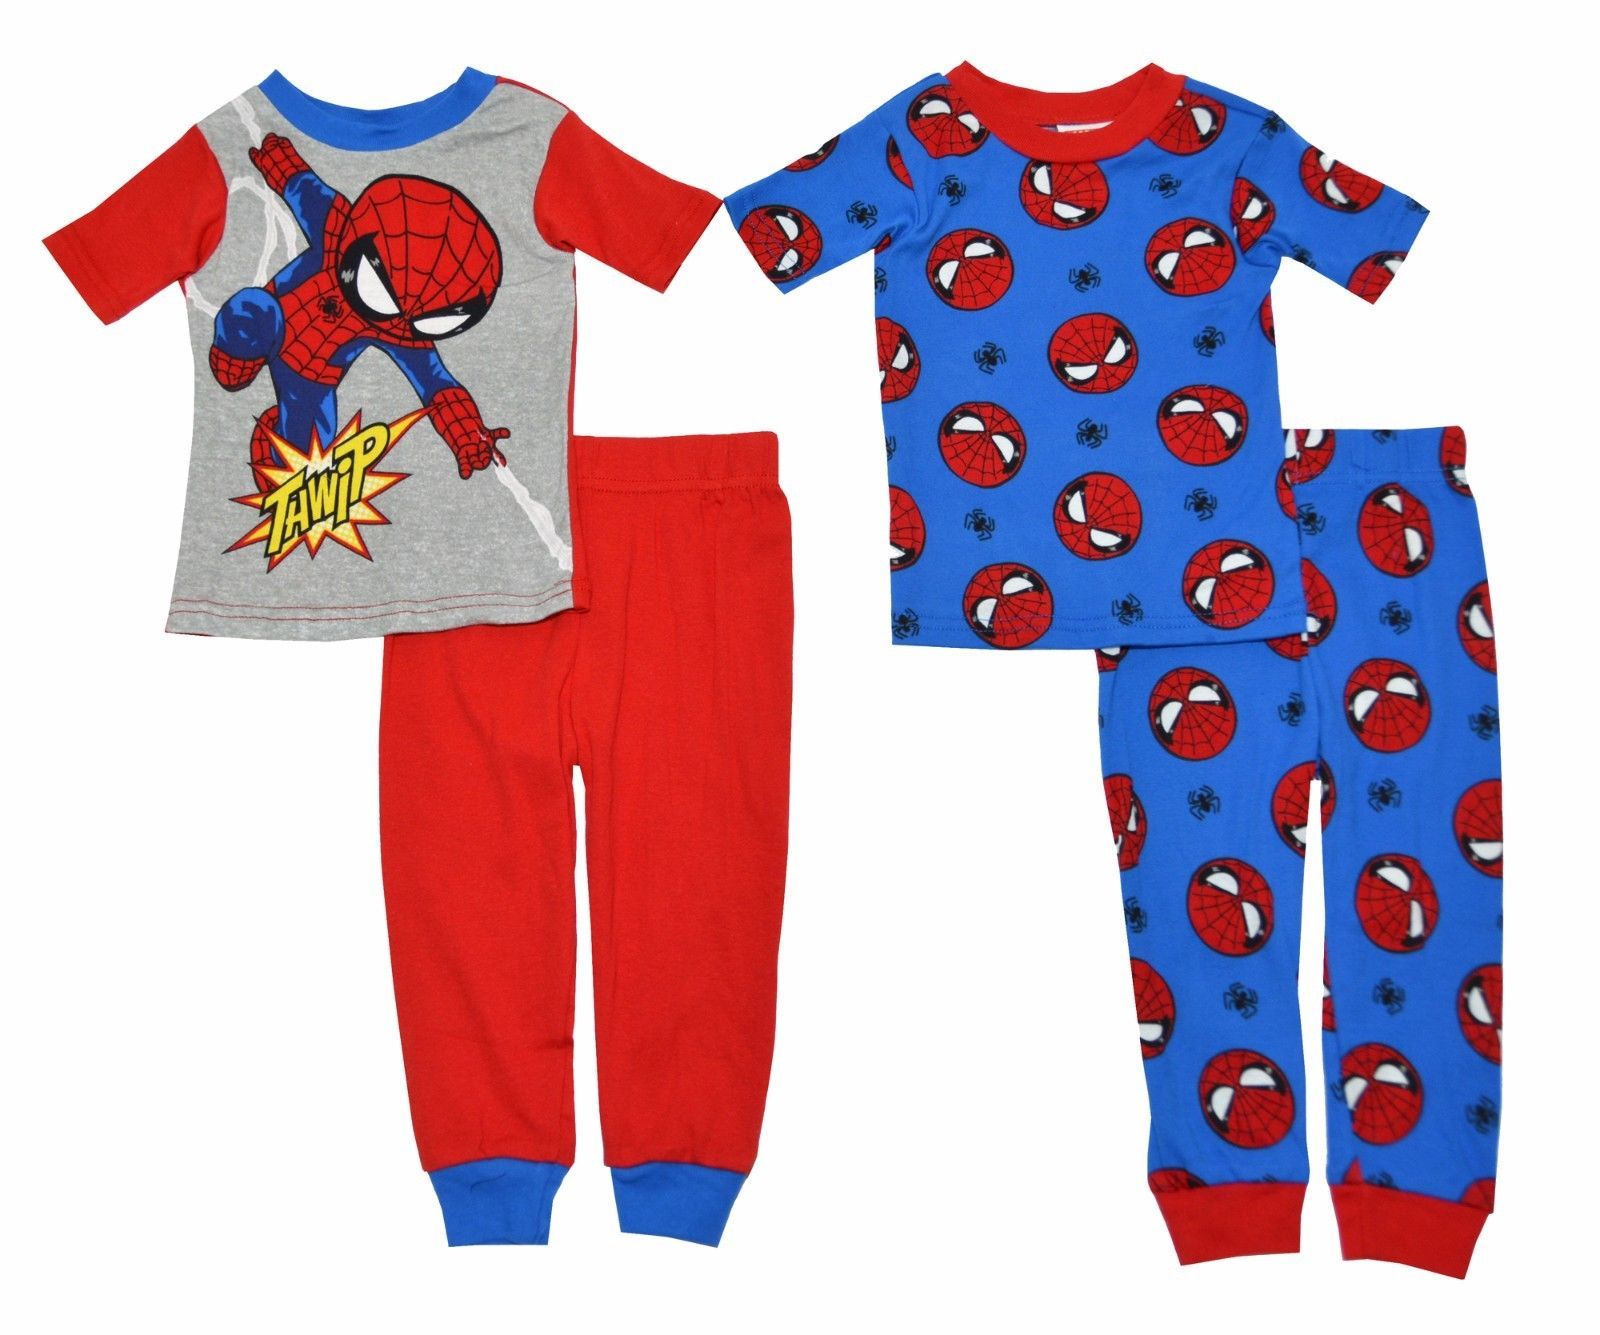 Marvel Boys Spidey In Training 4 Piece Cotton Pajama Set - Size 2T - Blue/Red - $19.95